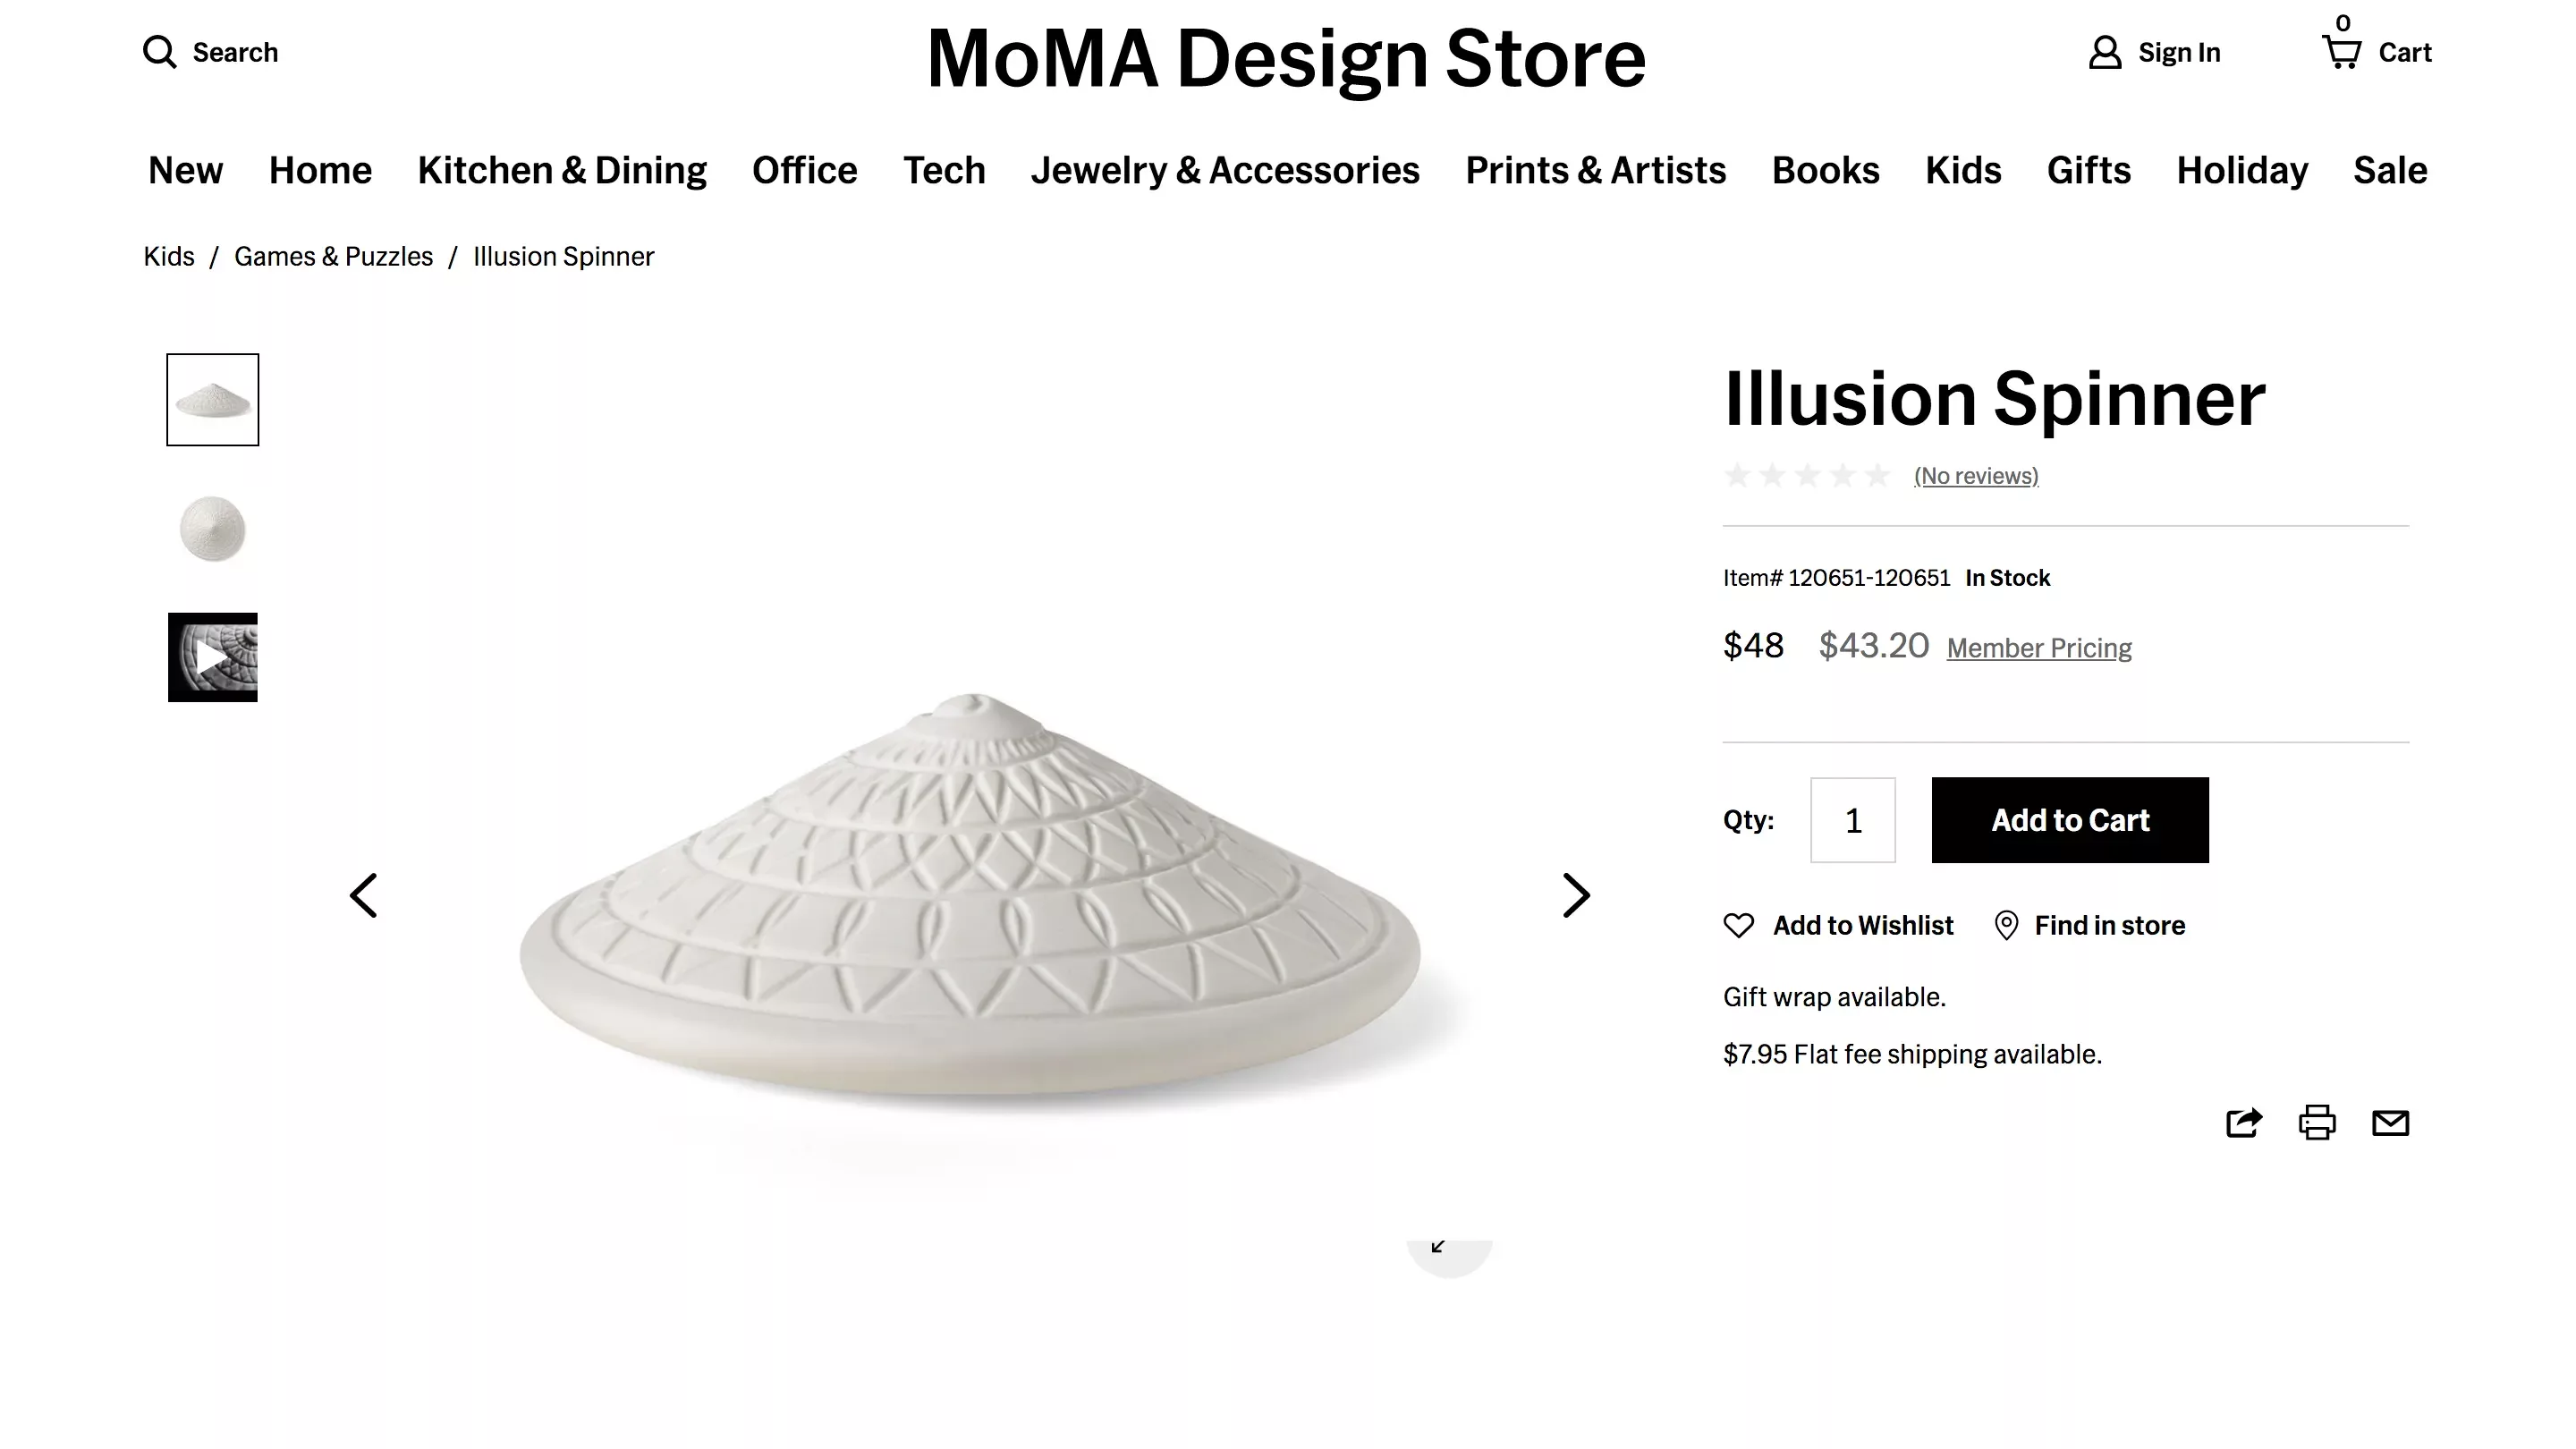 A screenshot of the Illusion Spinner on the MoMA Design Store website.